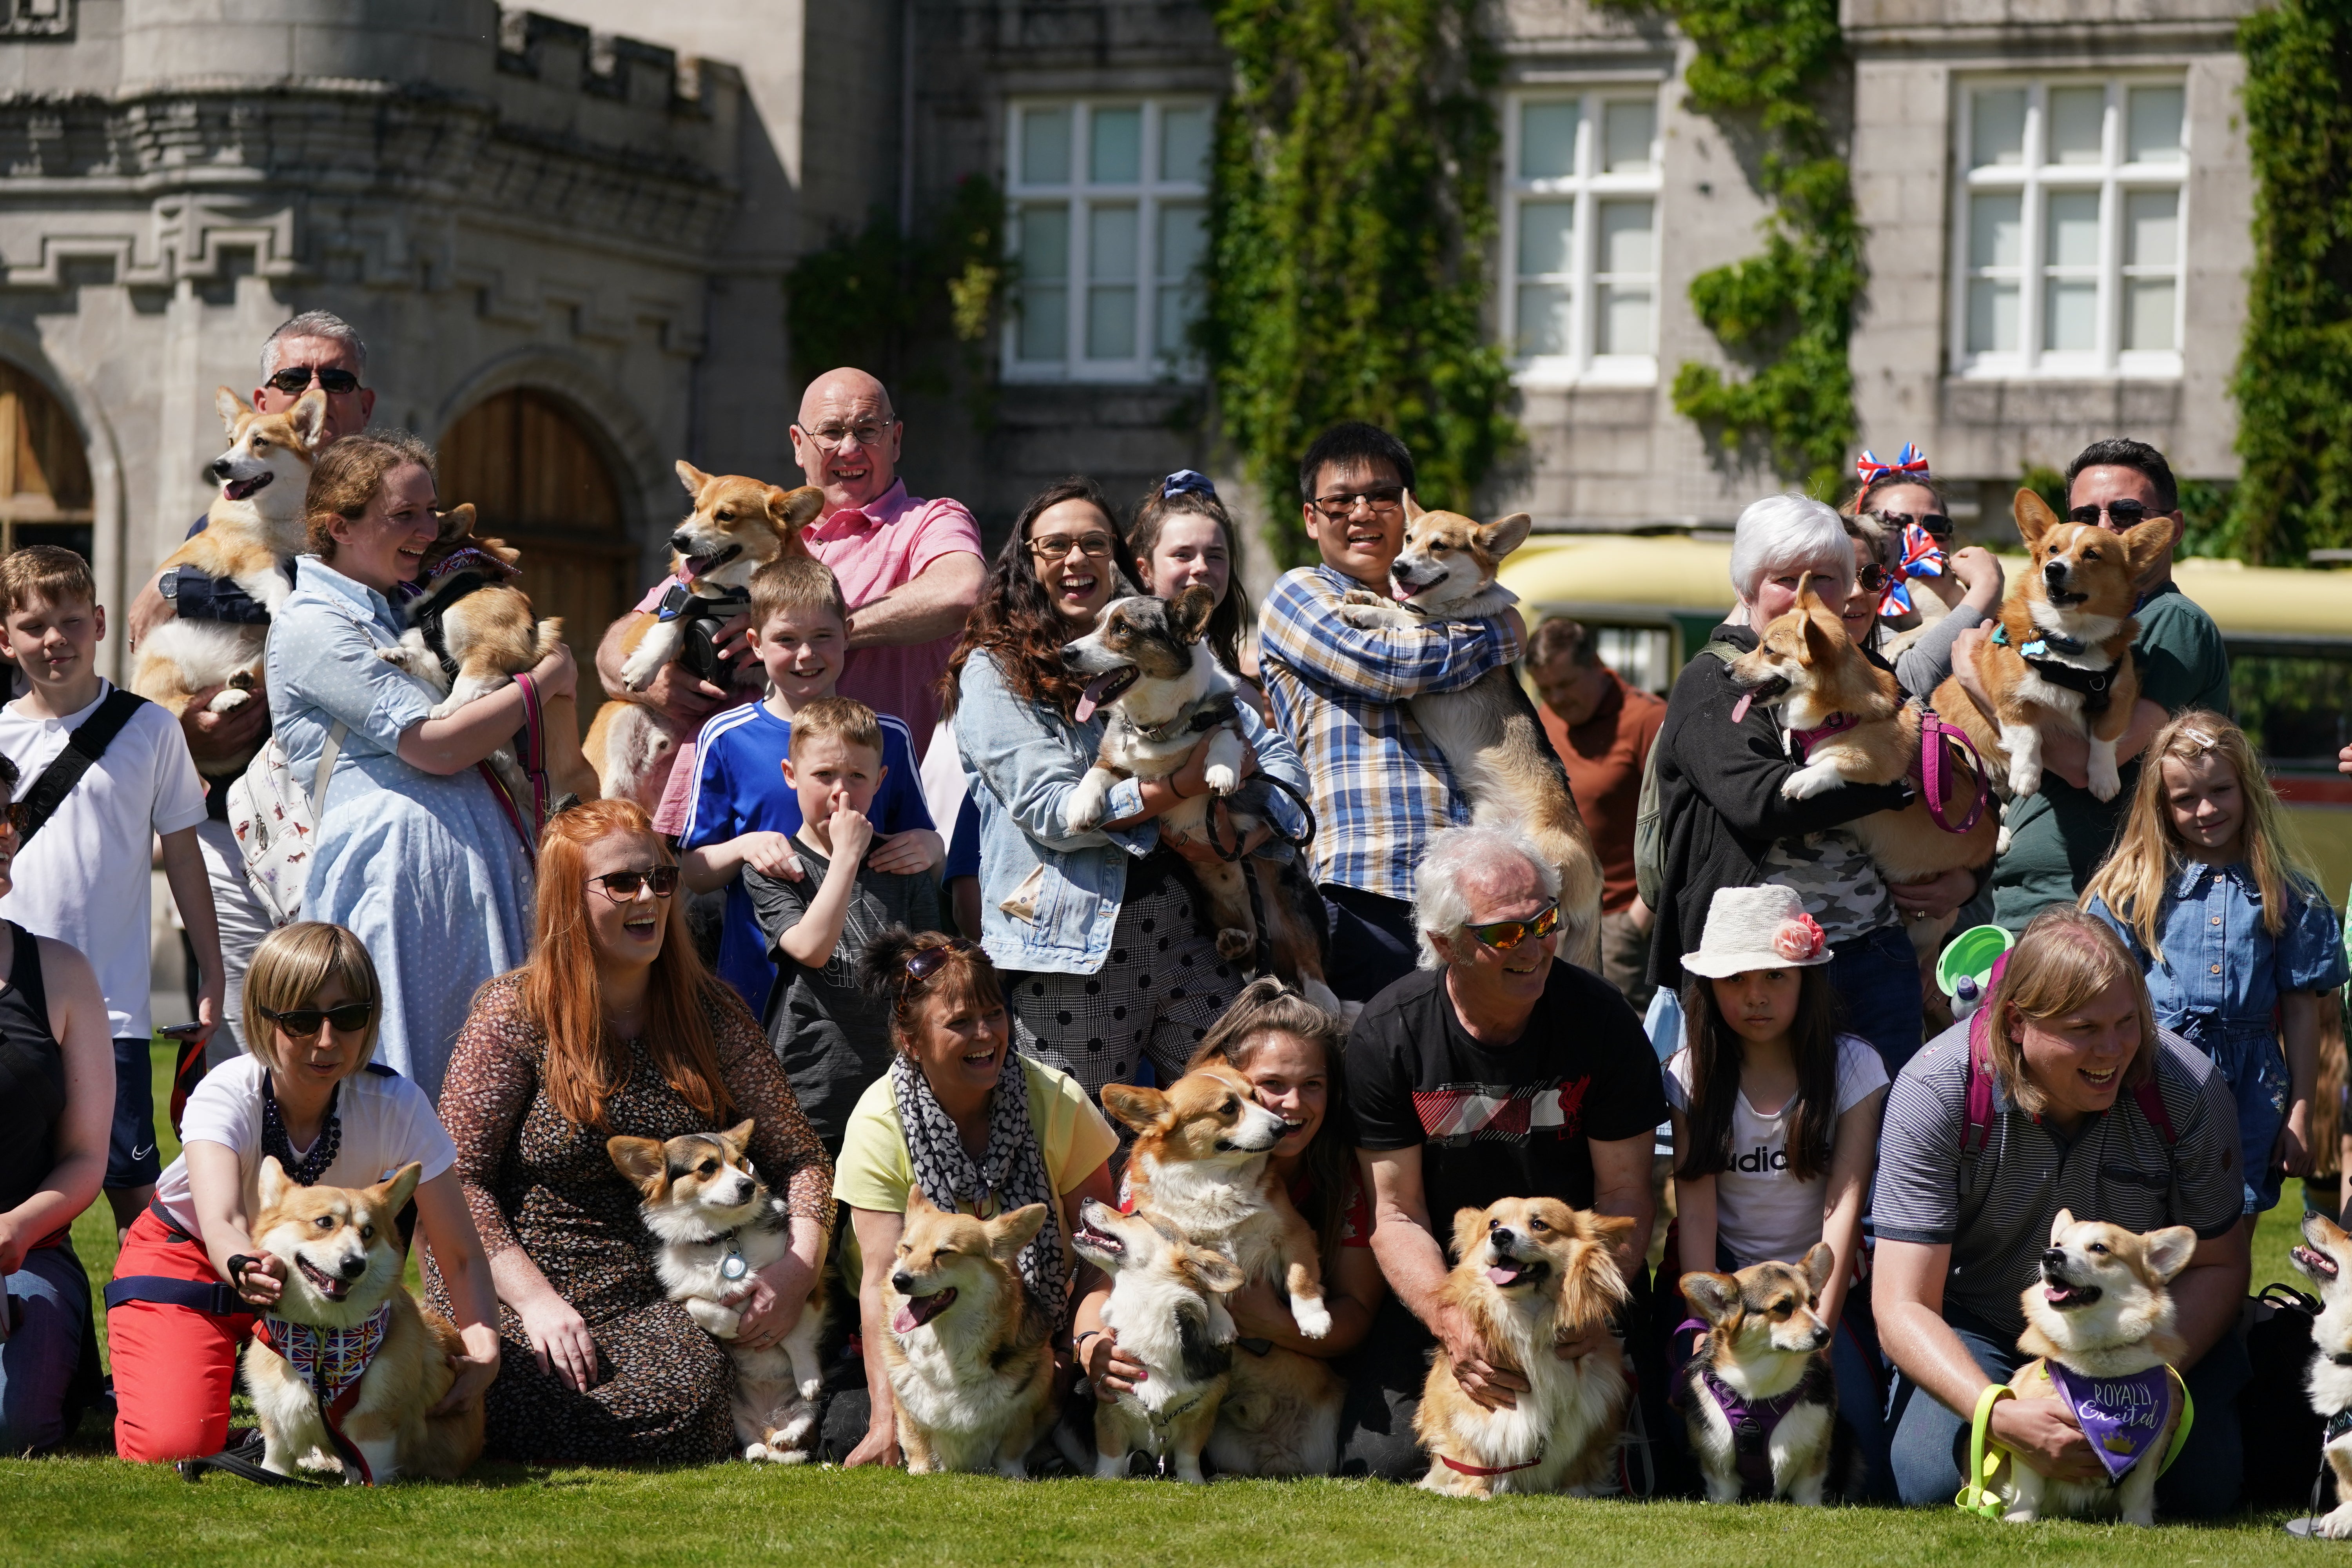 Dog owners enjoyed the event in the sunshine (Andrew Milligan/PA)